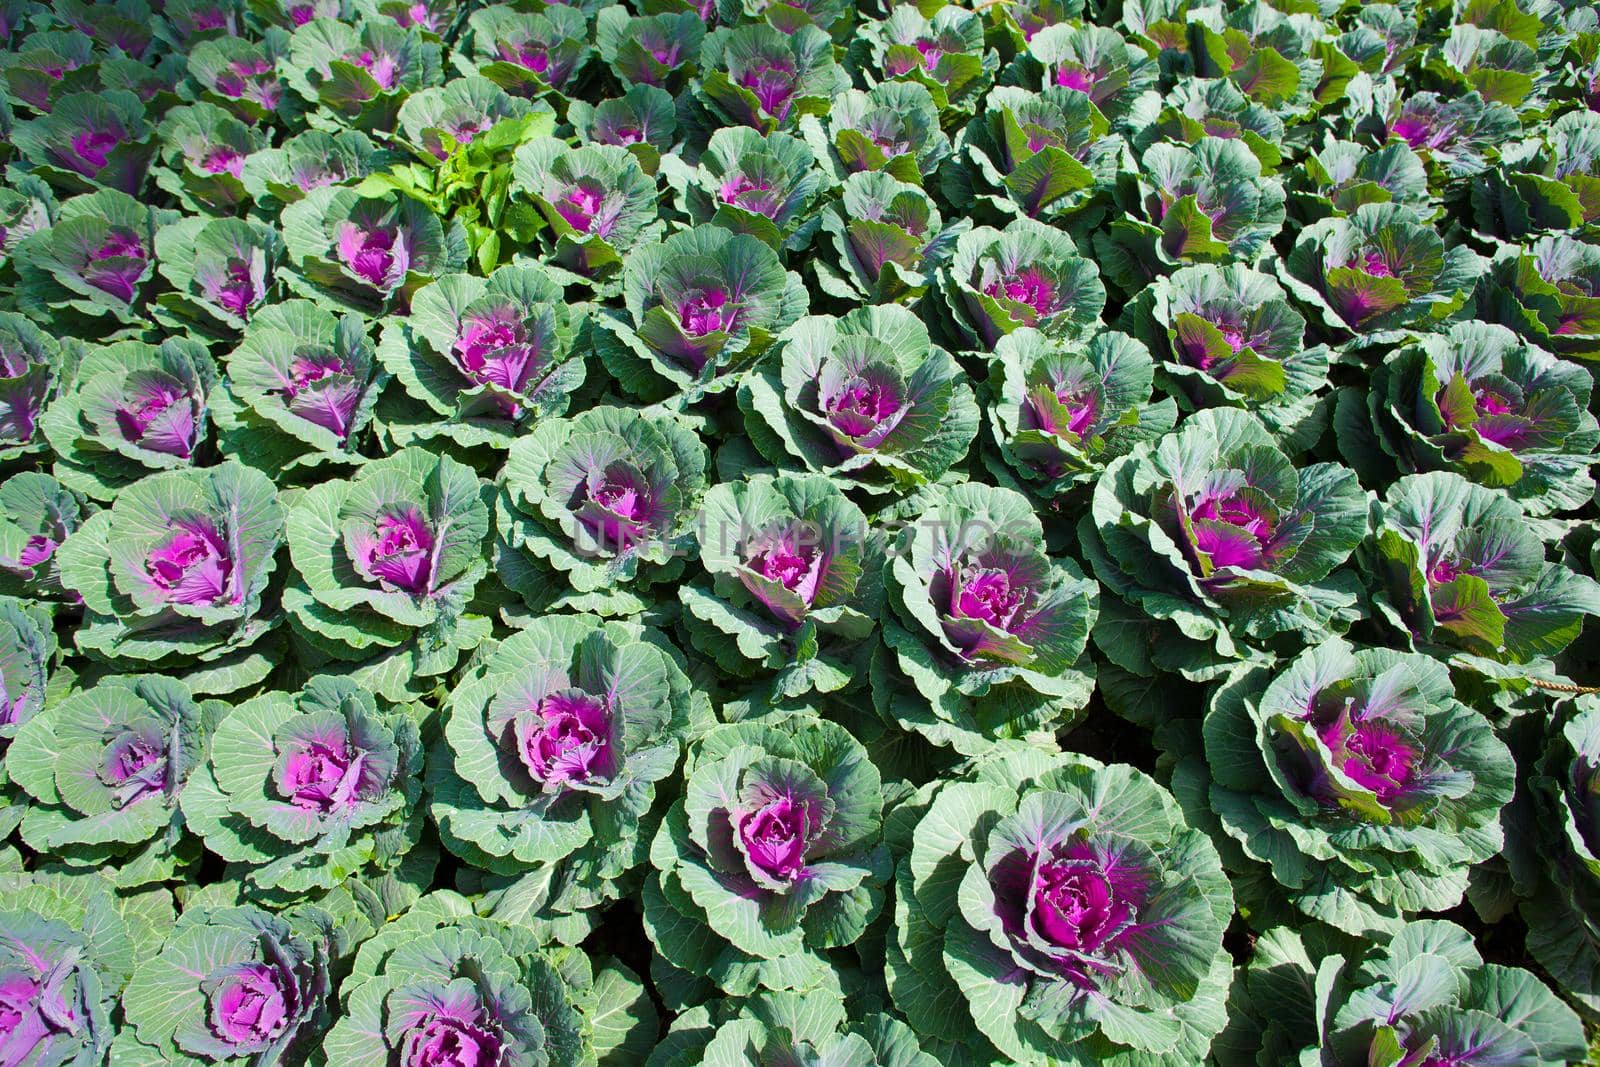 Green cabbage in rows